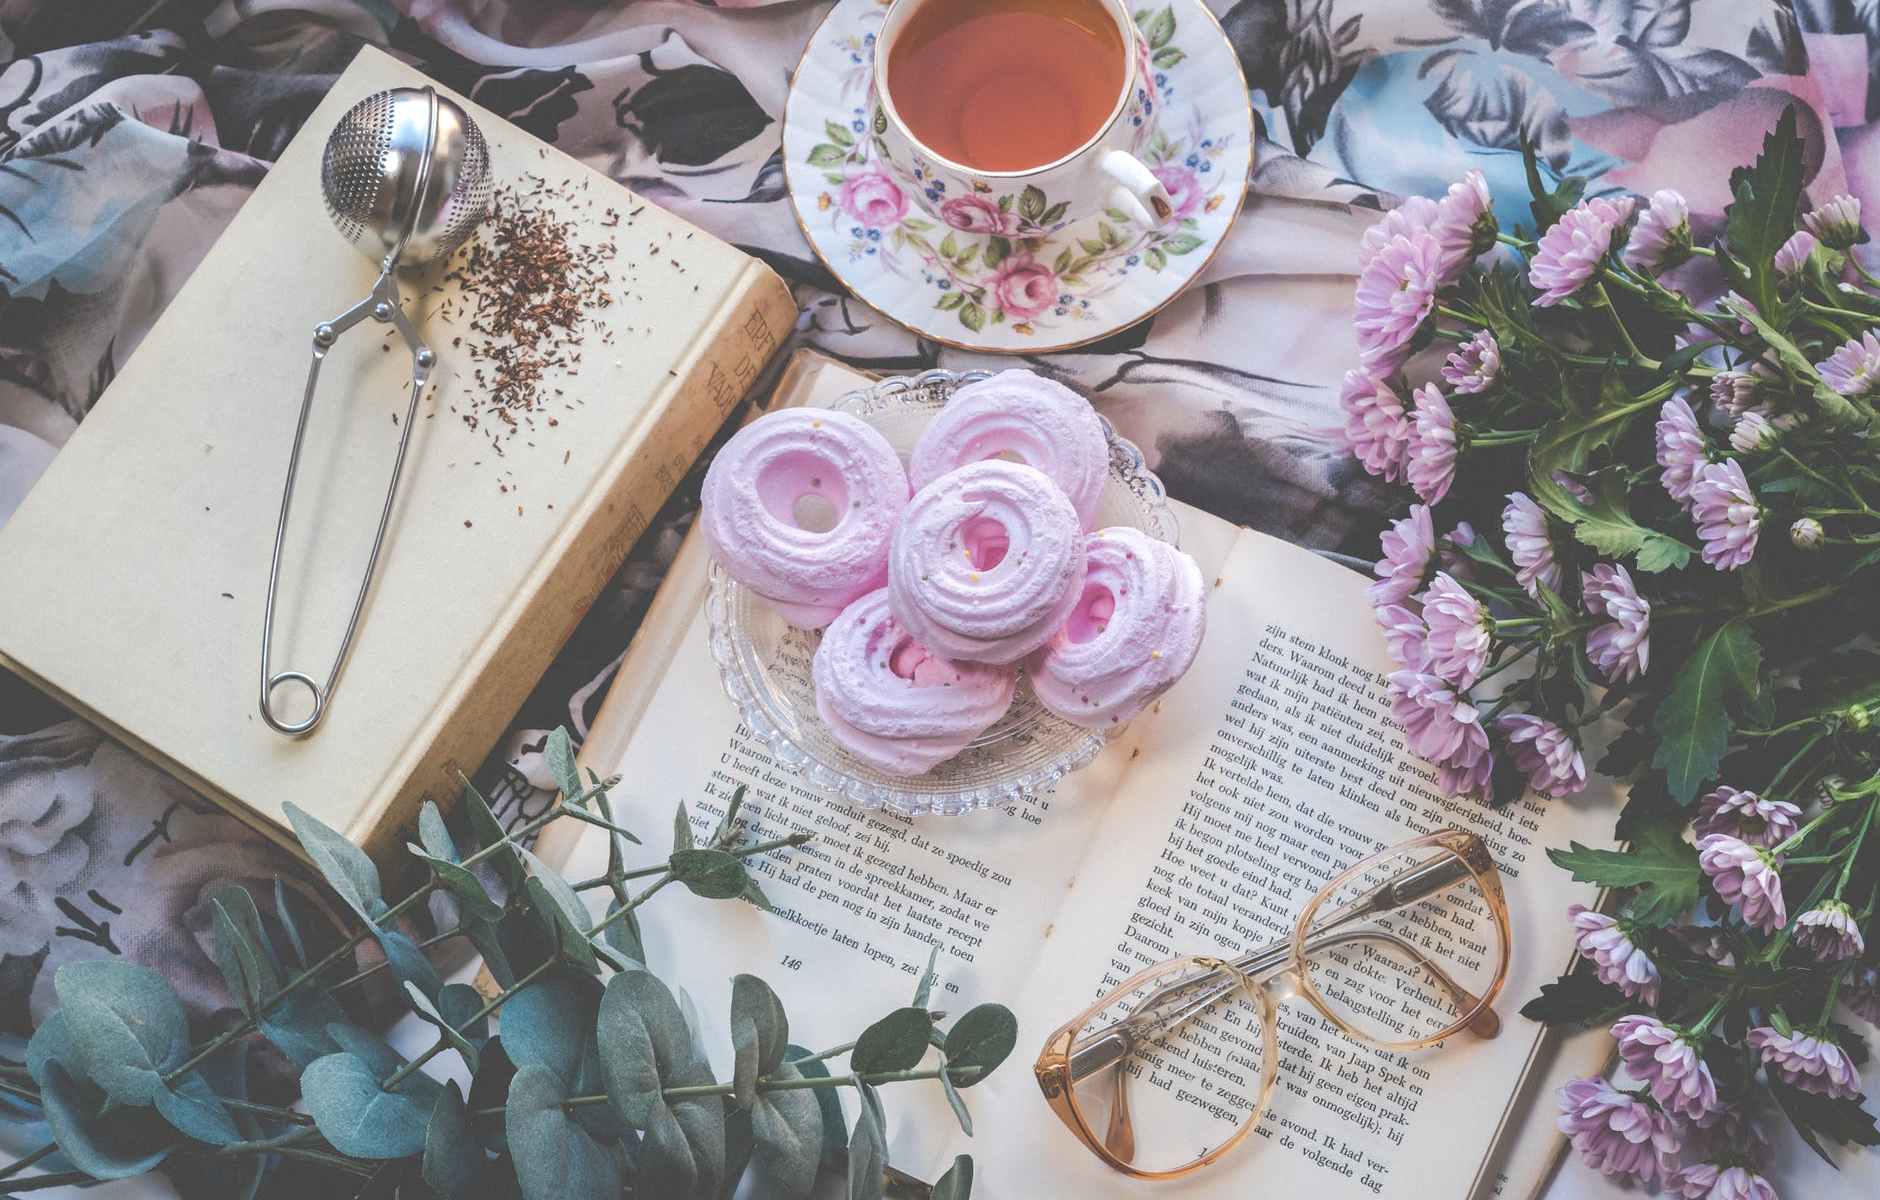 floral ceramic cup and saucer above open book